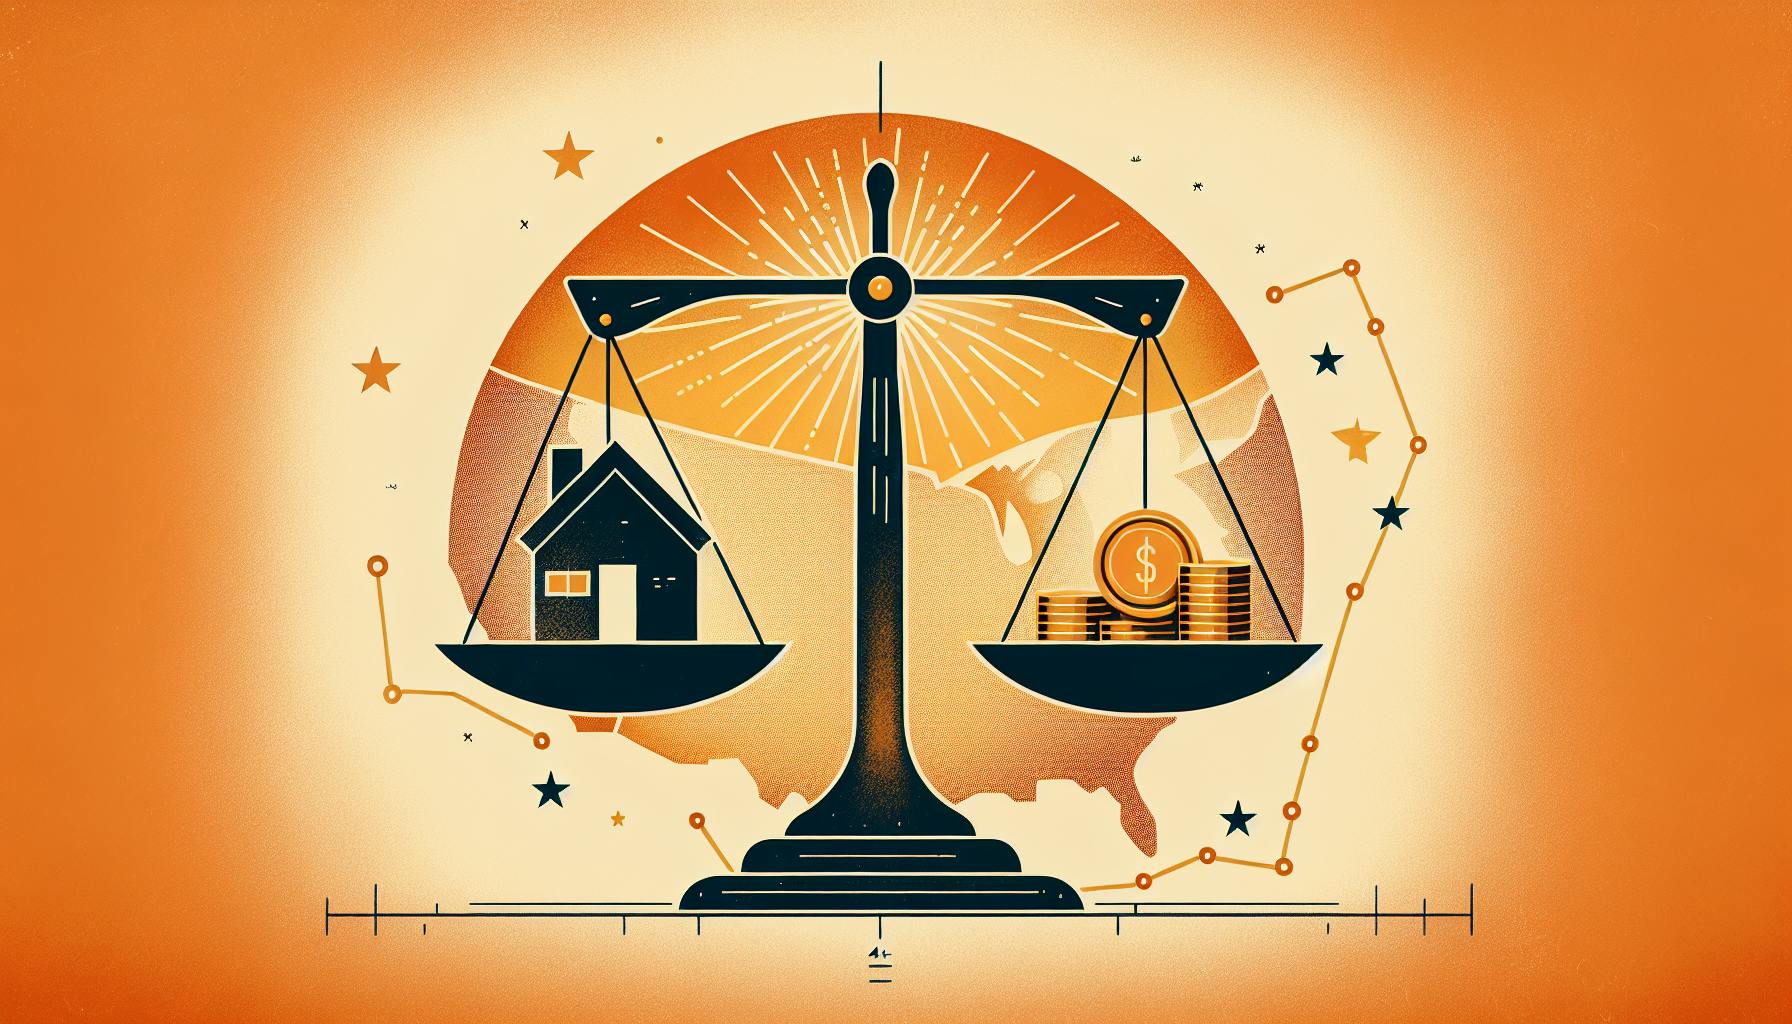 Real Estate Paralegal Salary in the US: A Glimpse into the Earnings in Property Law